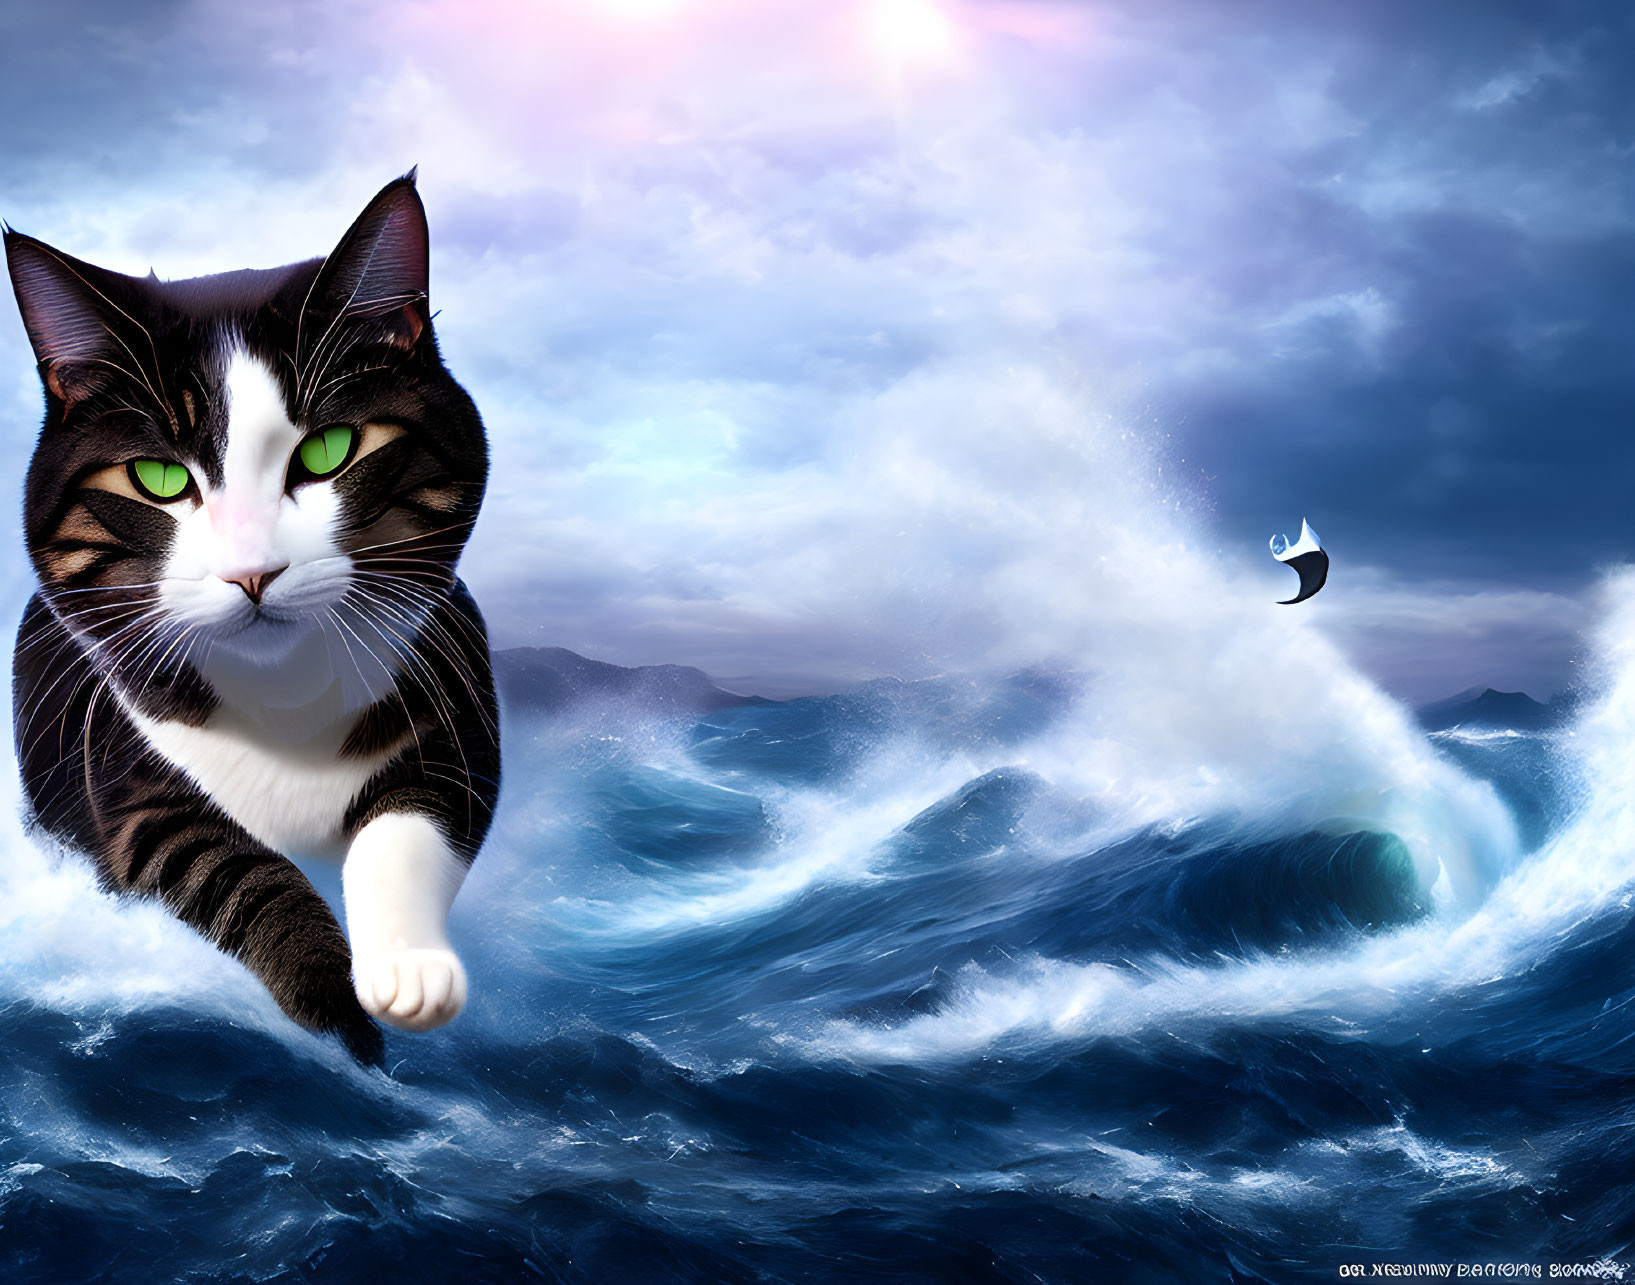 Surreal oversized cat amidst ocean waves with sailboat and stormy sky